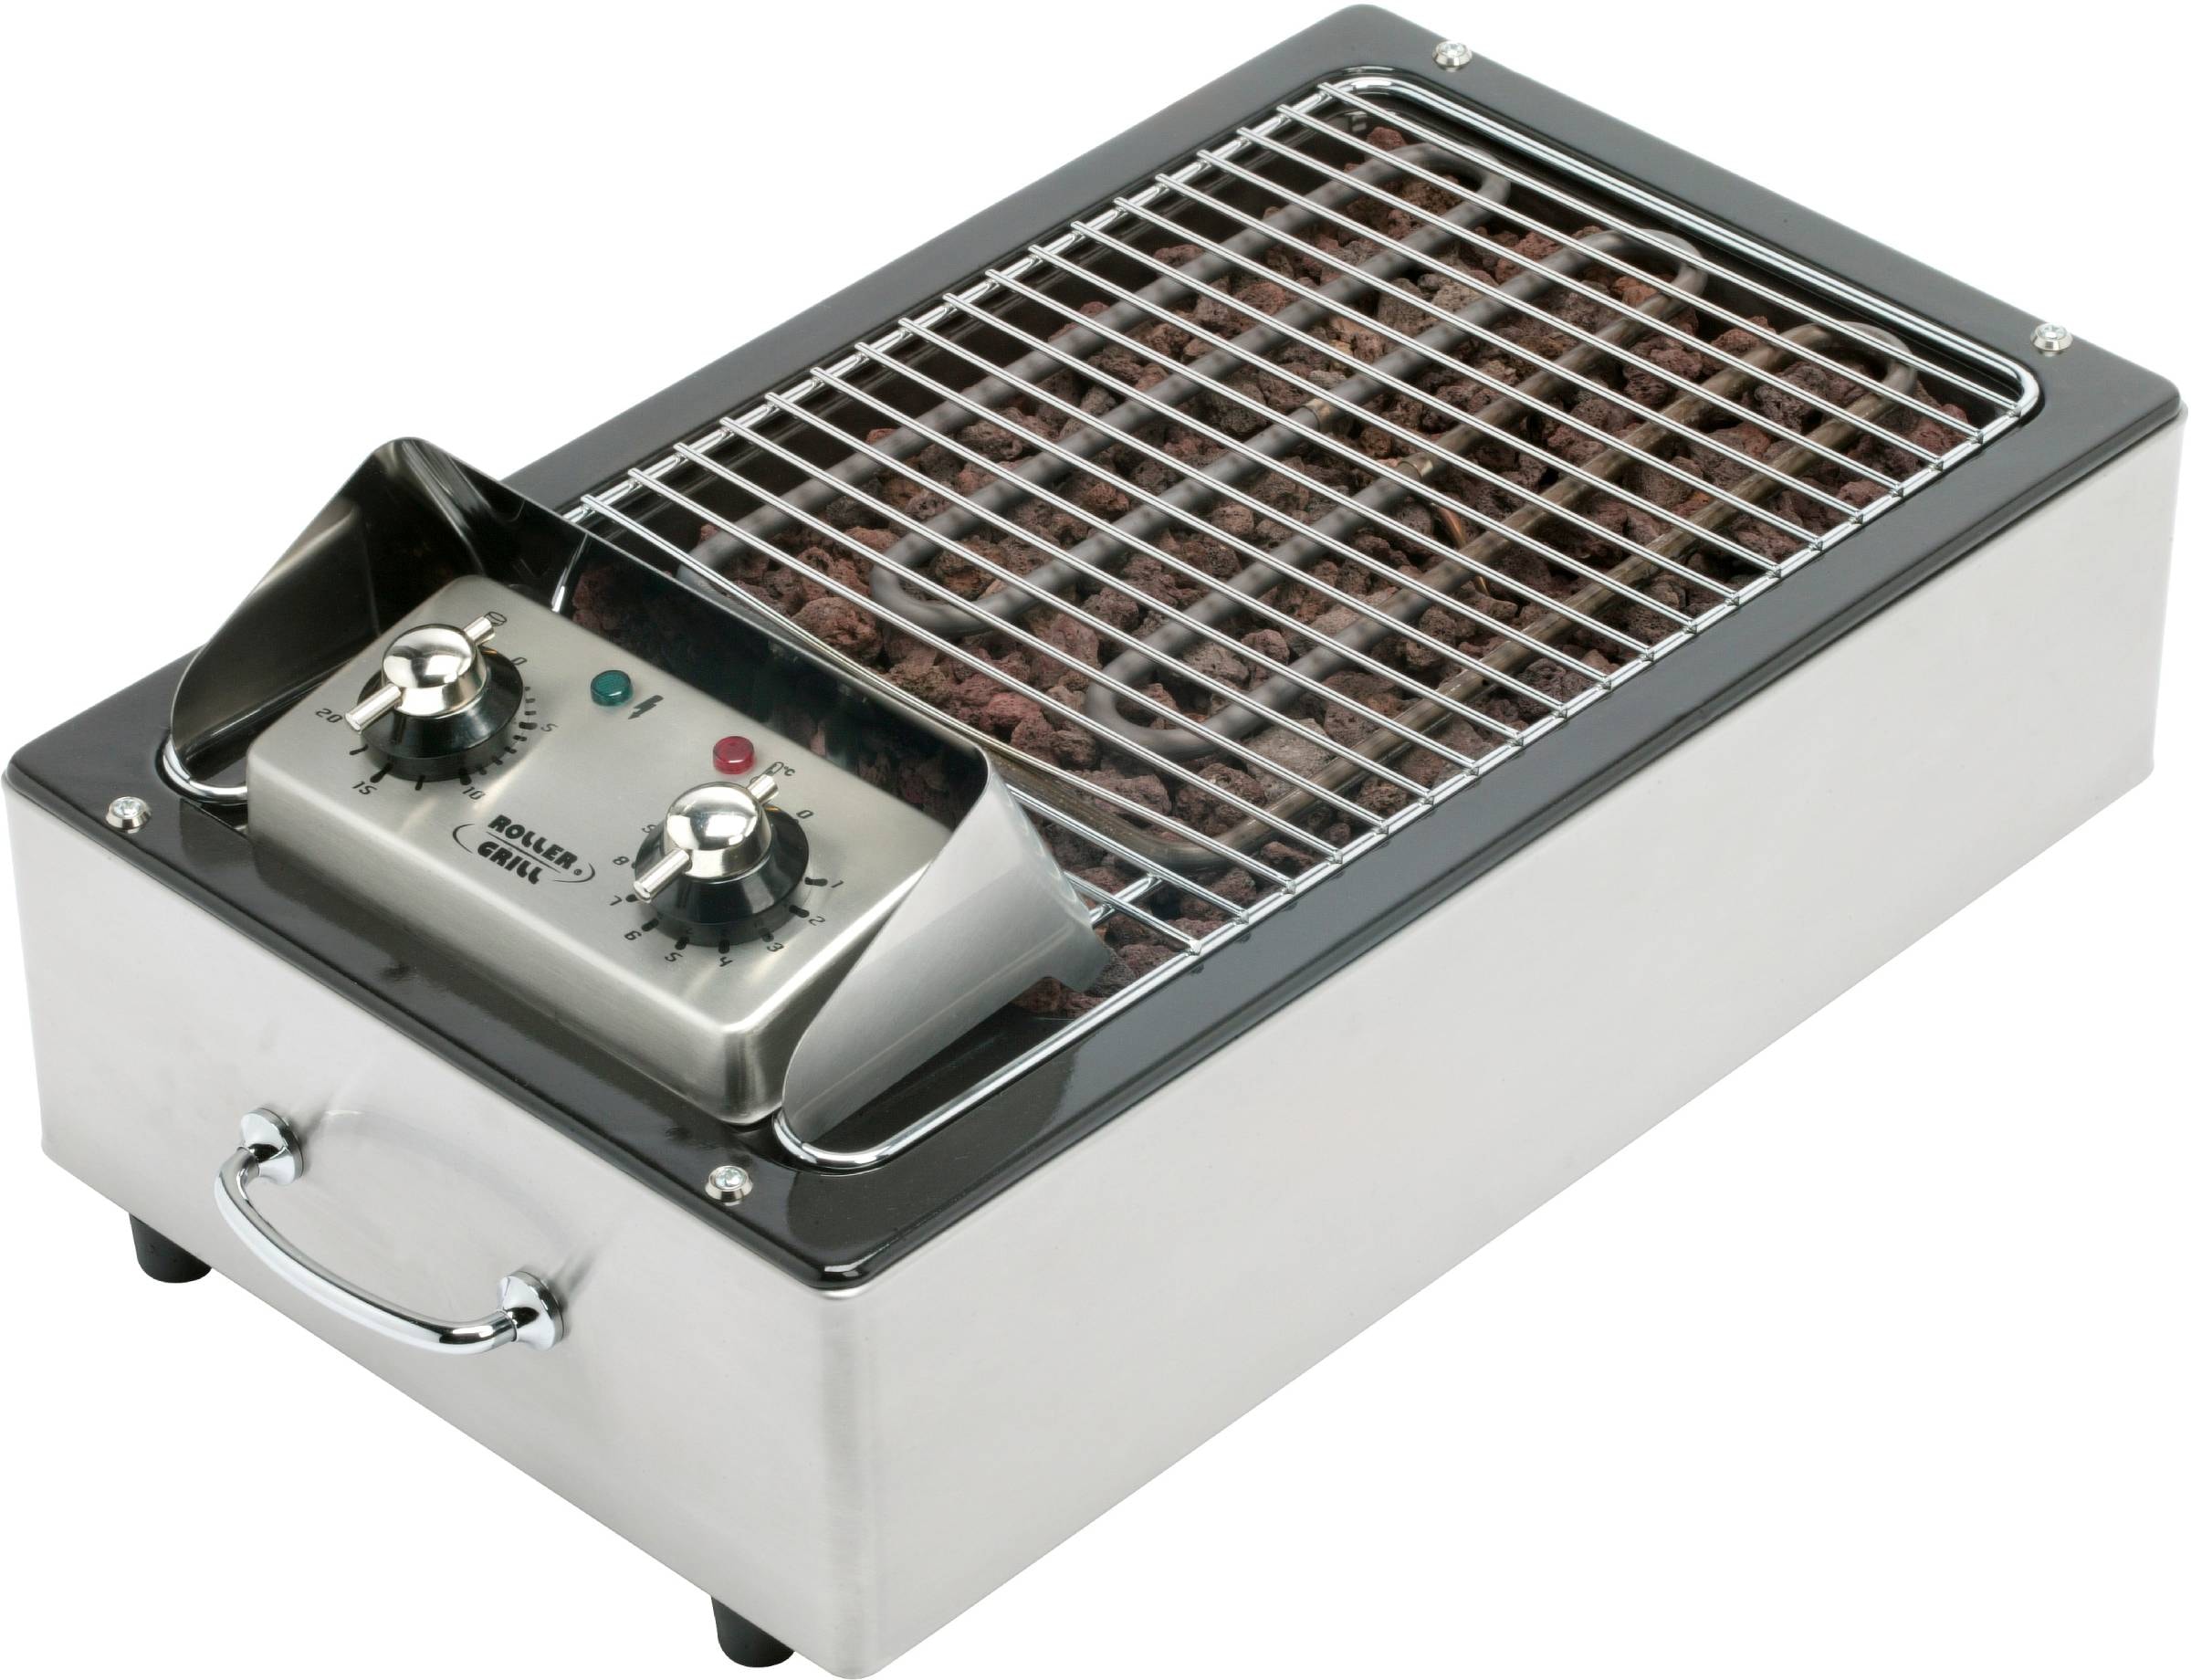 ROLLER GRILL Barbecue électrique  - GRILL130I